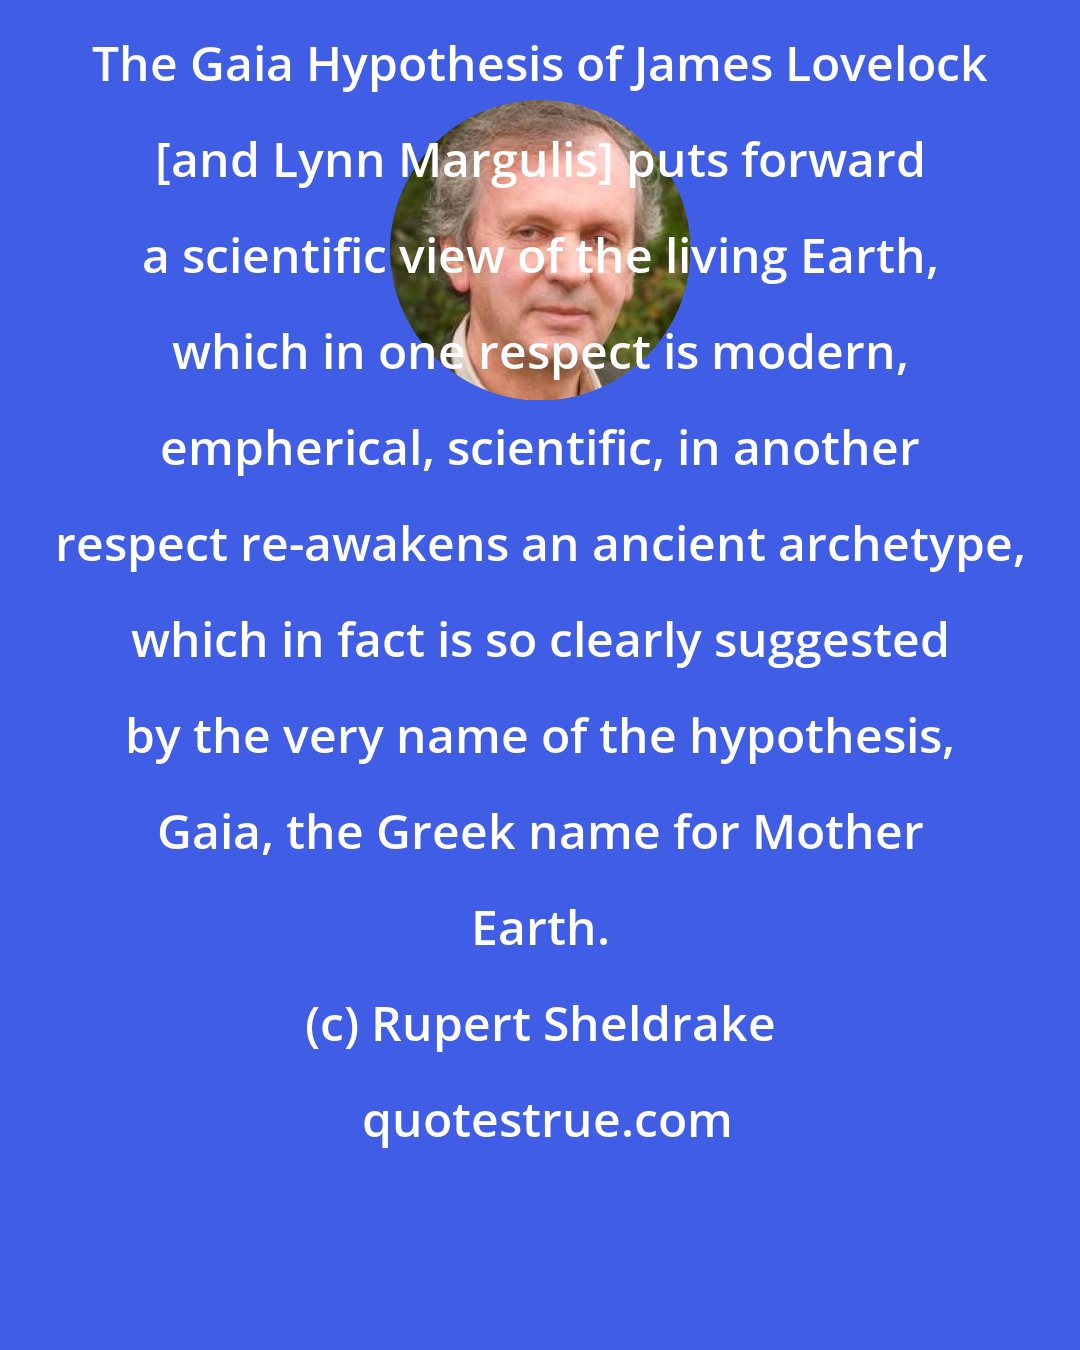 Rupert Sheldrake: The Gaia Hypothesis of James Lovelock [and Lynn Margulis] puts forward a scientific view of the living Earth, which in one respect is modern, empherical, scientific, in another respect re-awakens an ancient archetype, which in fact is so clearly suggested by the very name of the hypothesis, Gaia, the Greek name for Mother Earth.